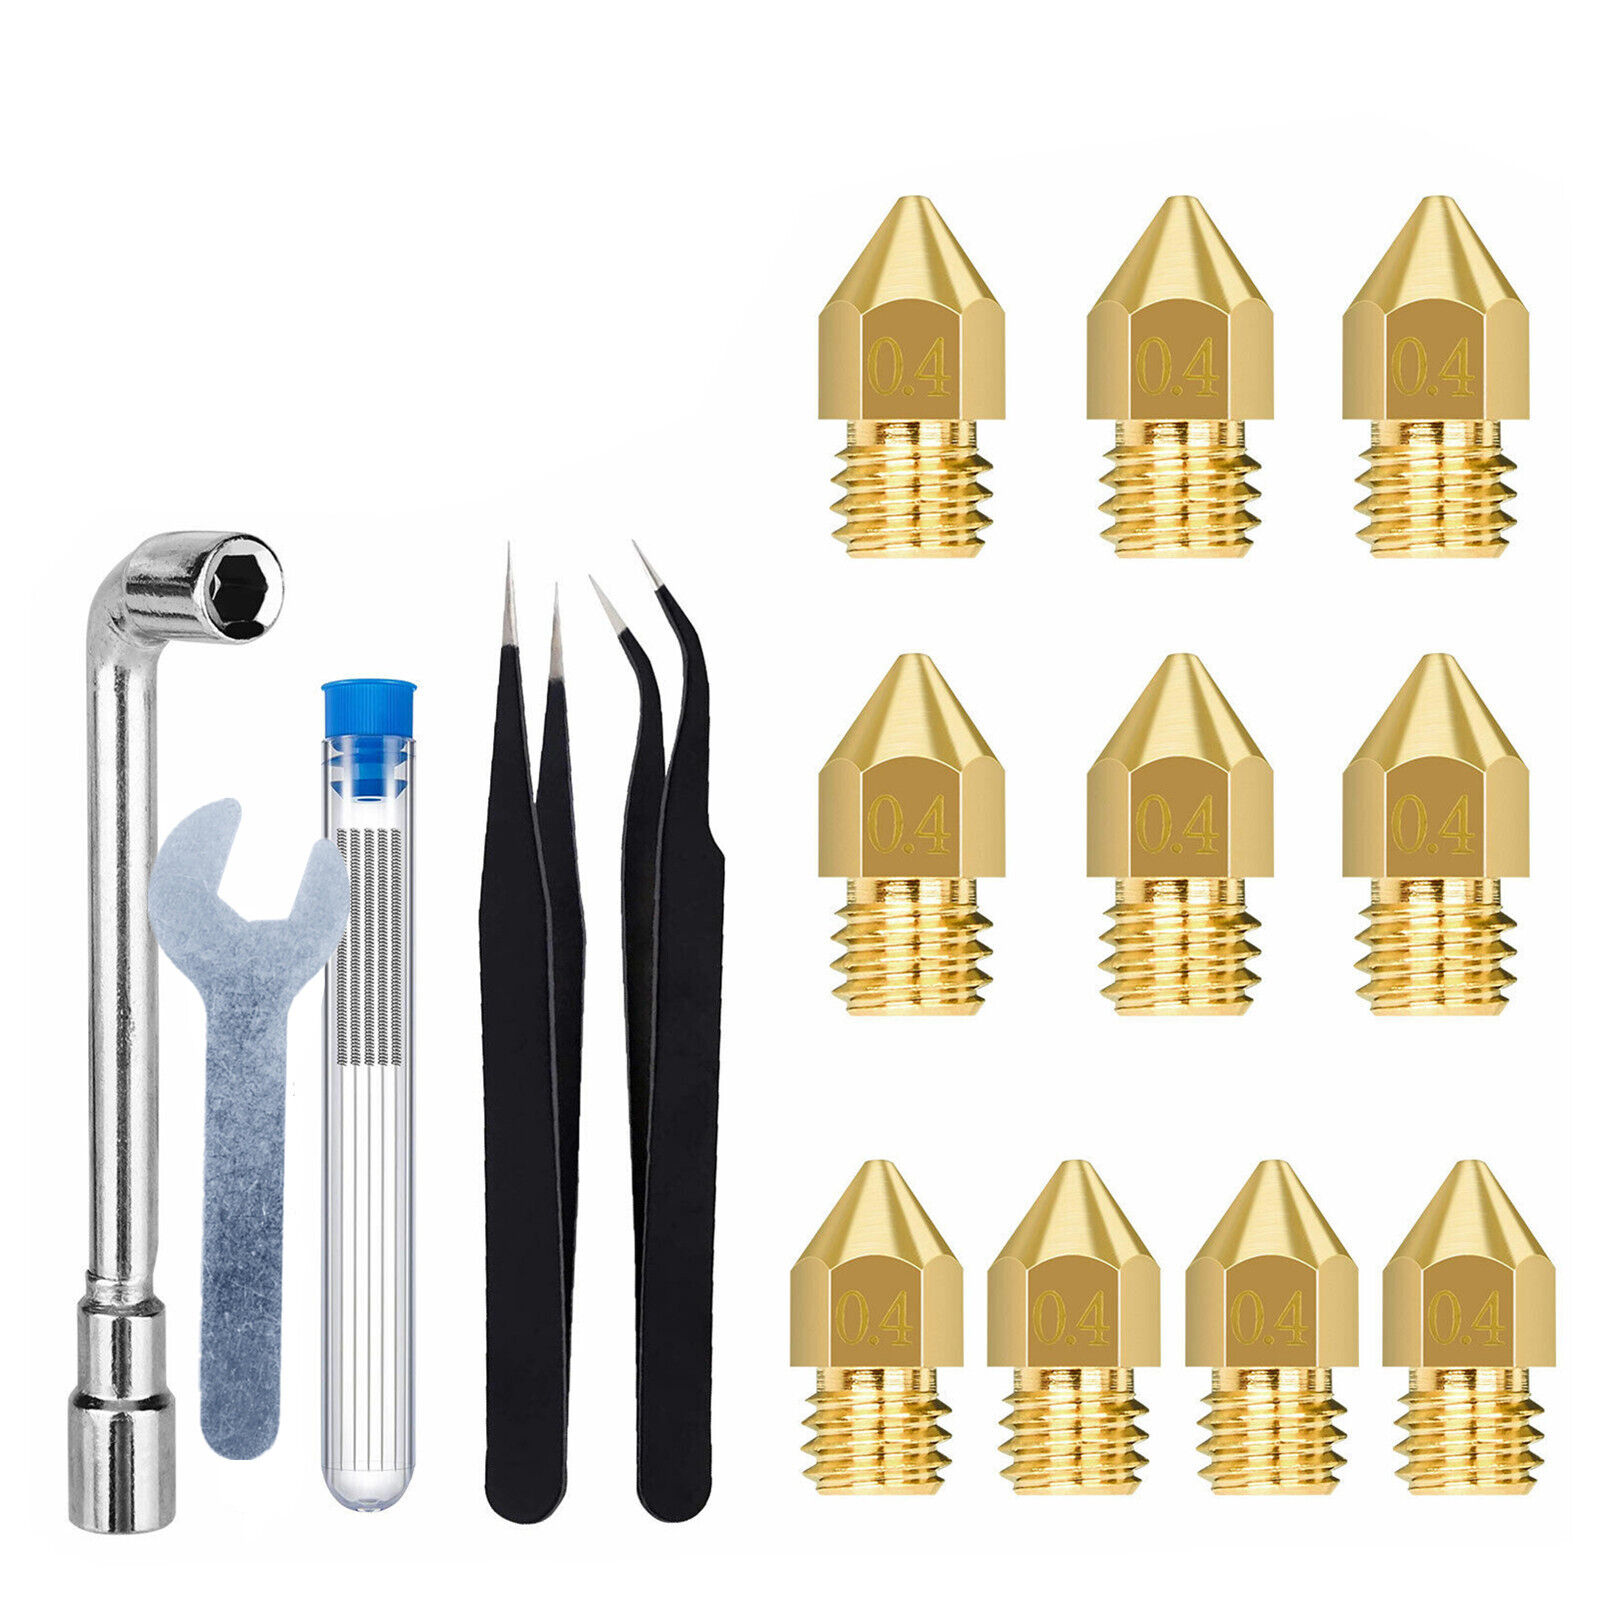 Brass Stainless Steel Printer Nozzles Nozzle Cleaning Needles Accessories Kit w